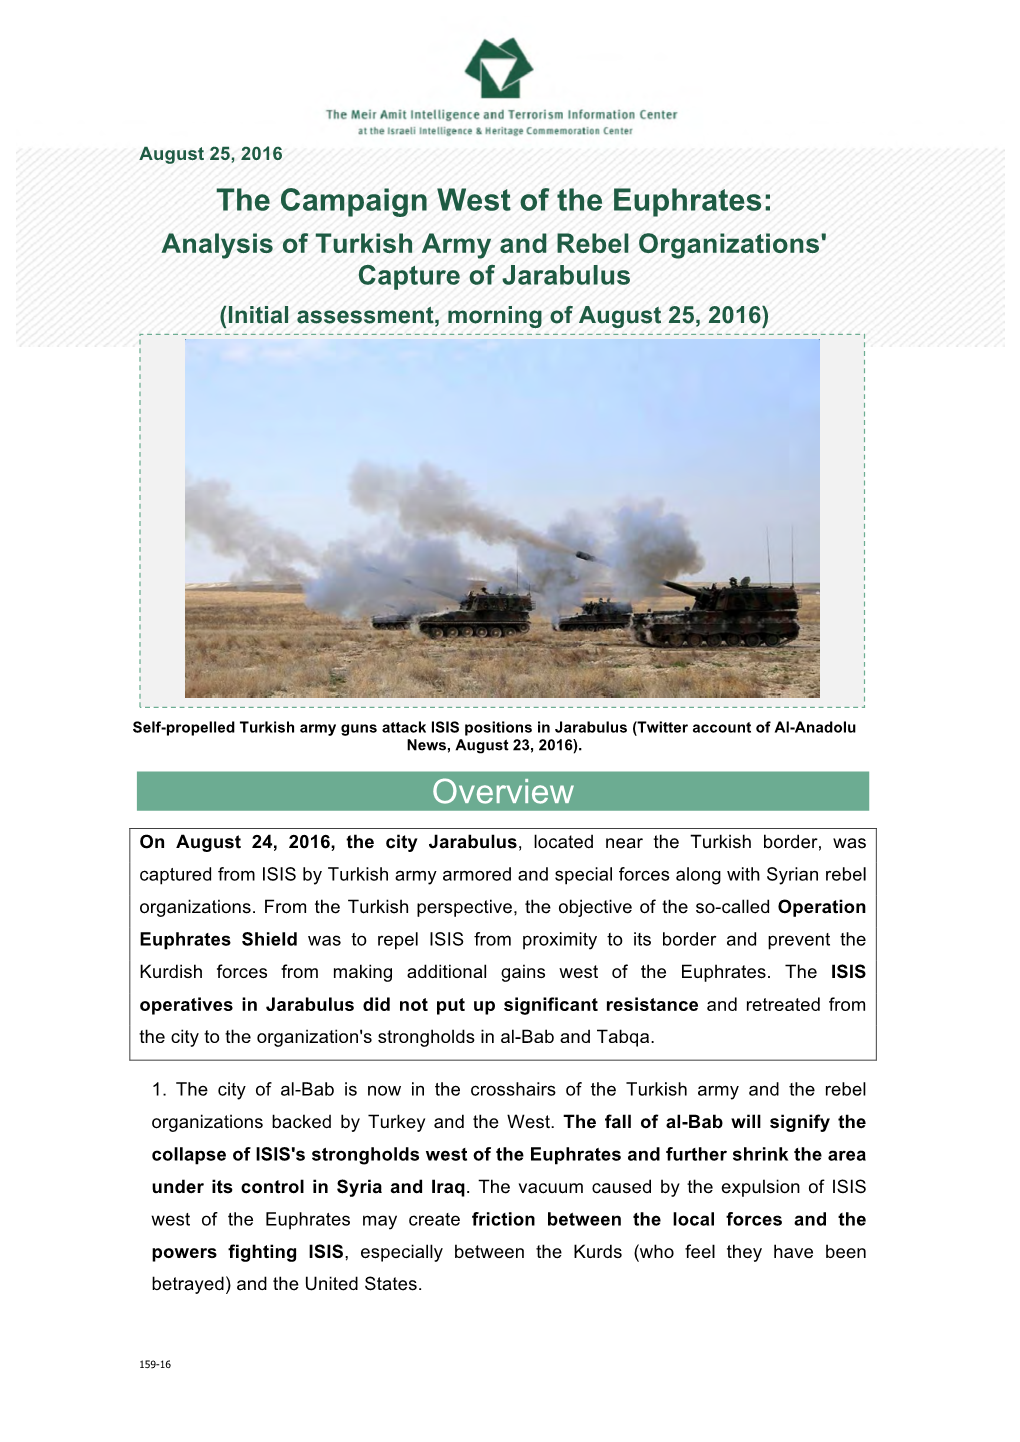 Analysis of Turkish Army and Rebel Organizations' Capture of Jarabulus (Initial Assessment, Morning of August 25, 2016)